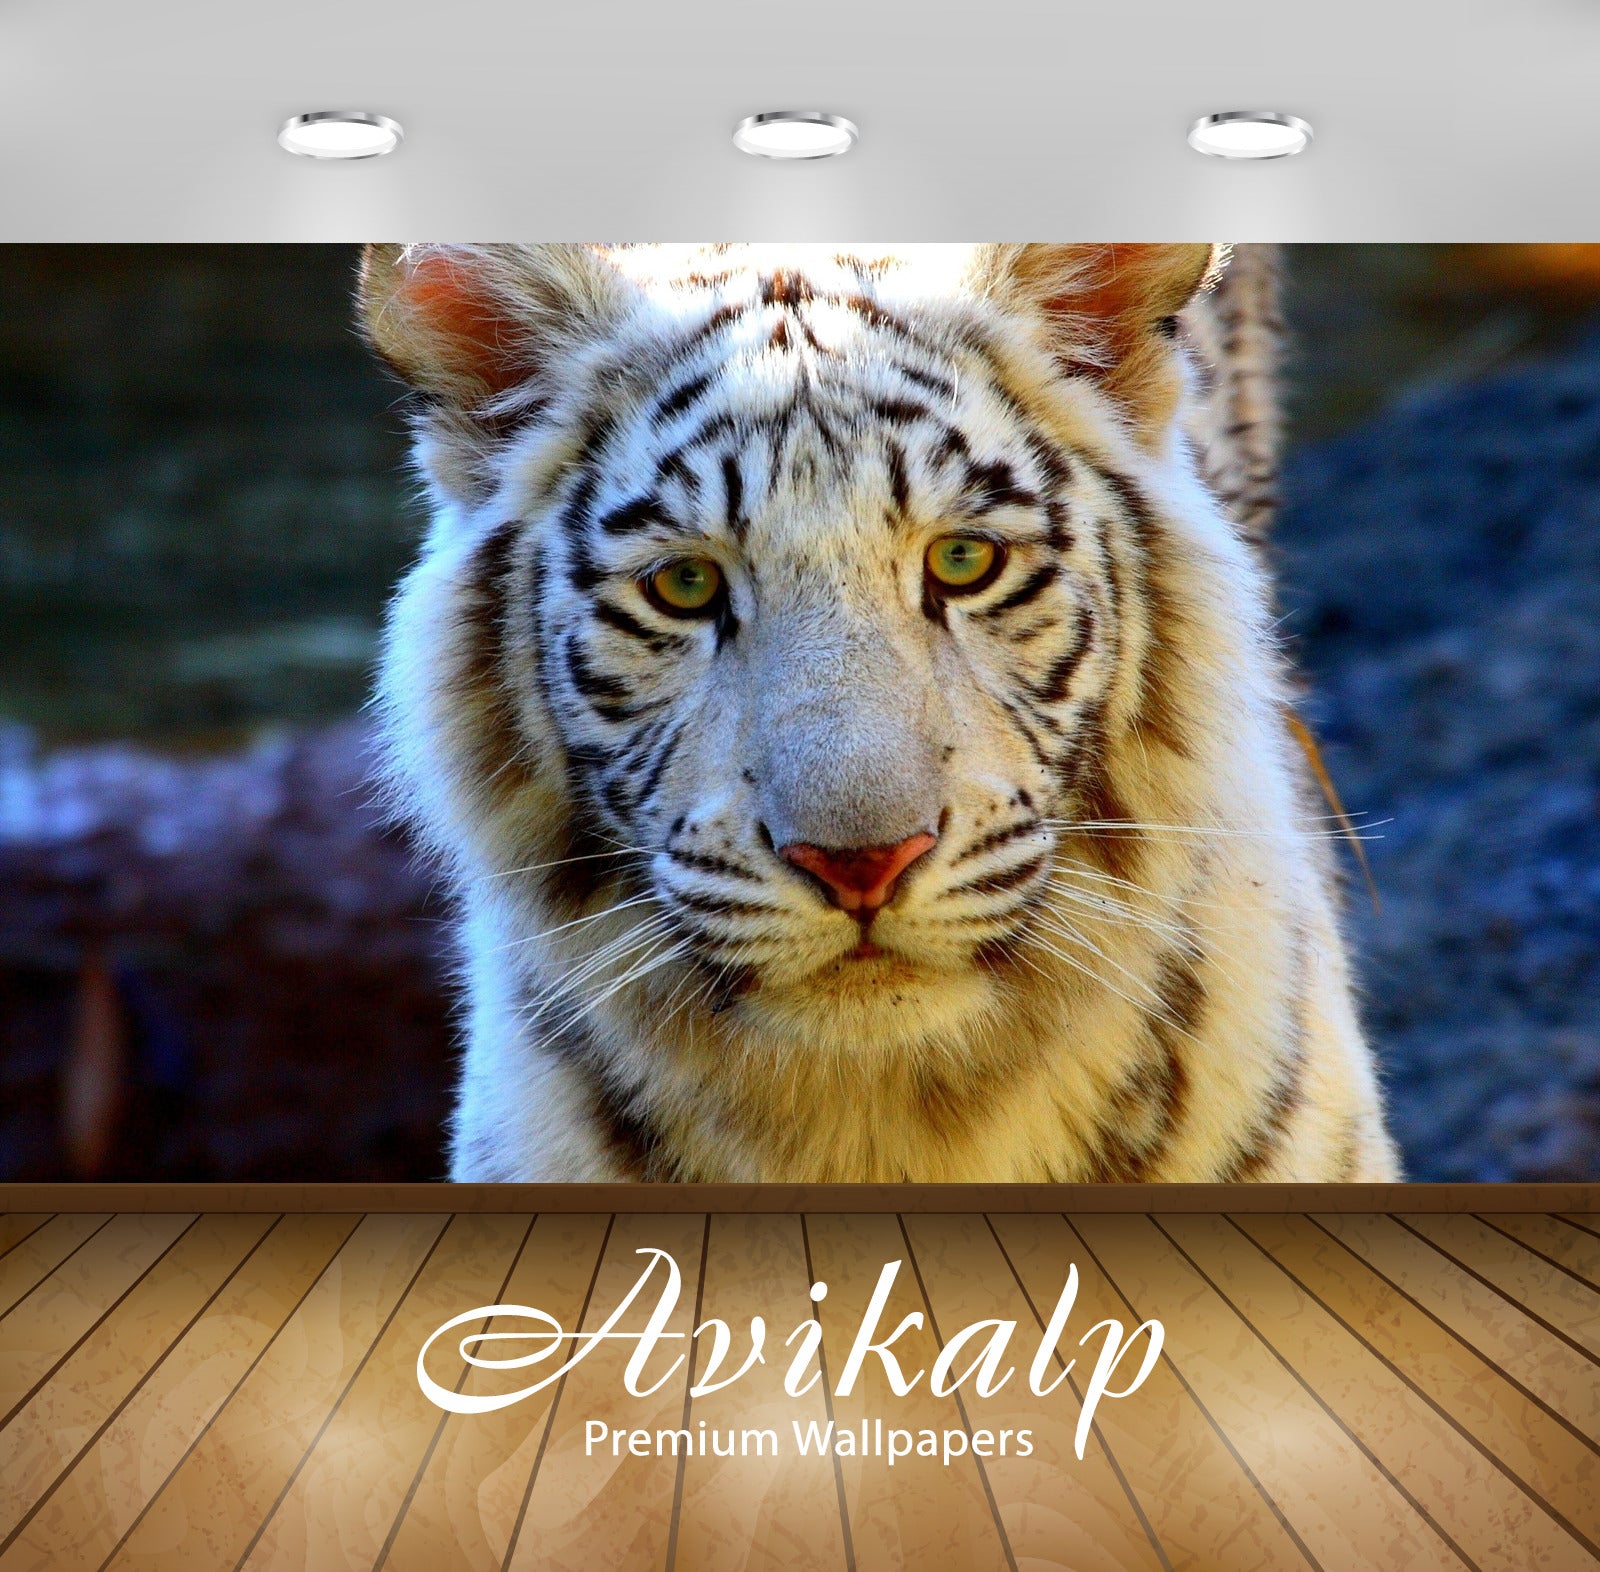 Avikalp Exclusive Awi1398 Tigers Full HD Wallpapers for Living room, Hall, Kids Room, Kitchen, TV Ba